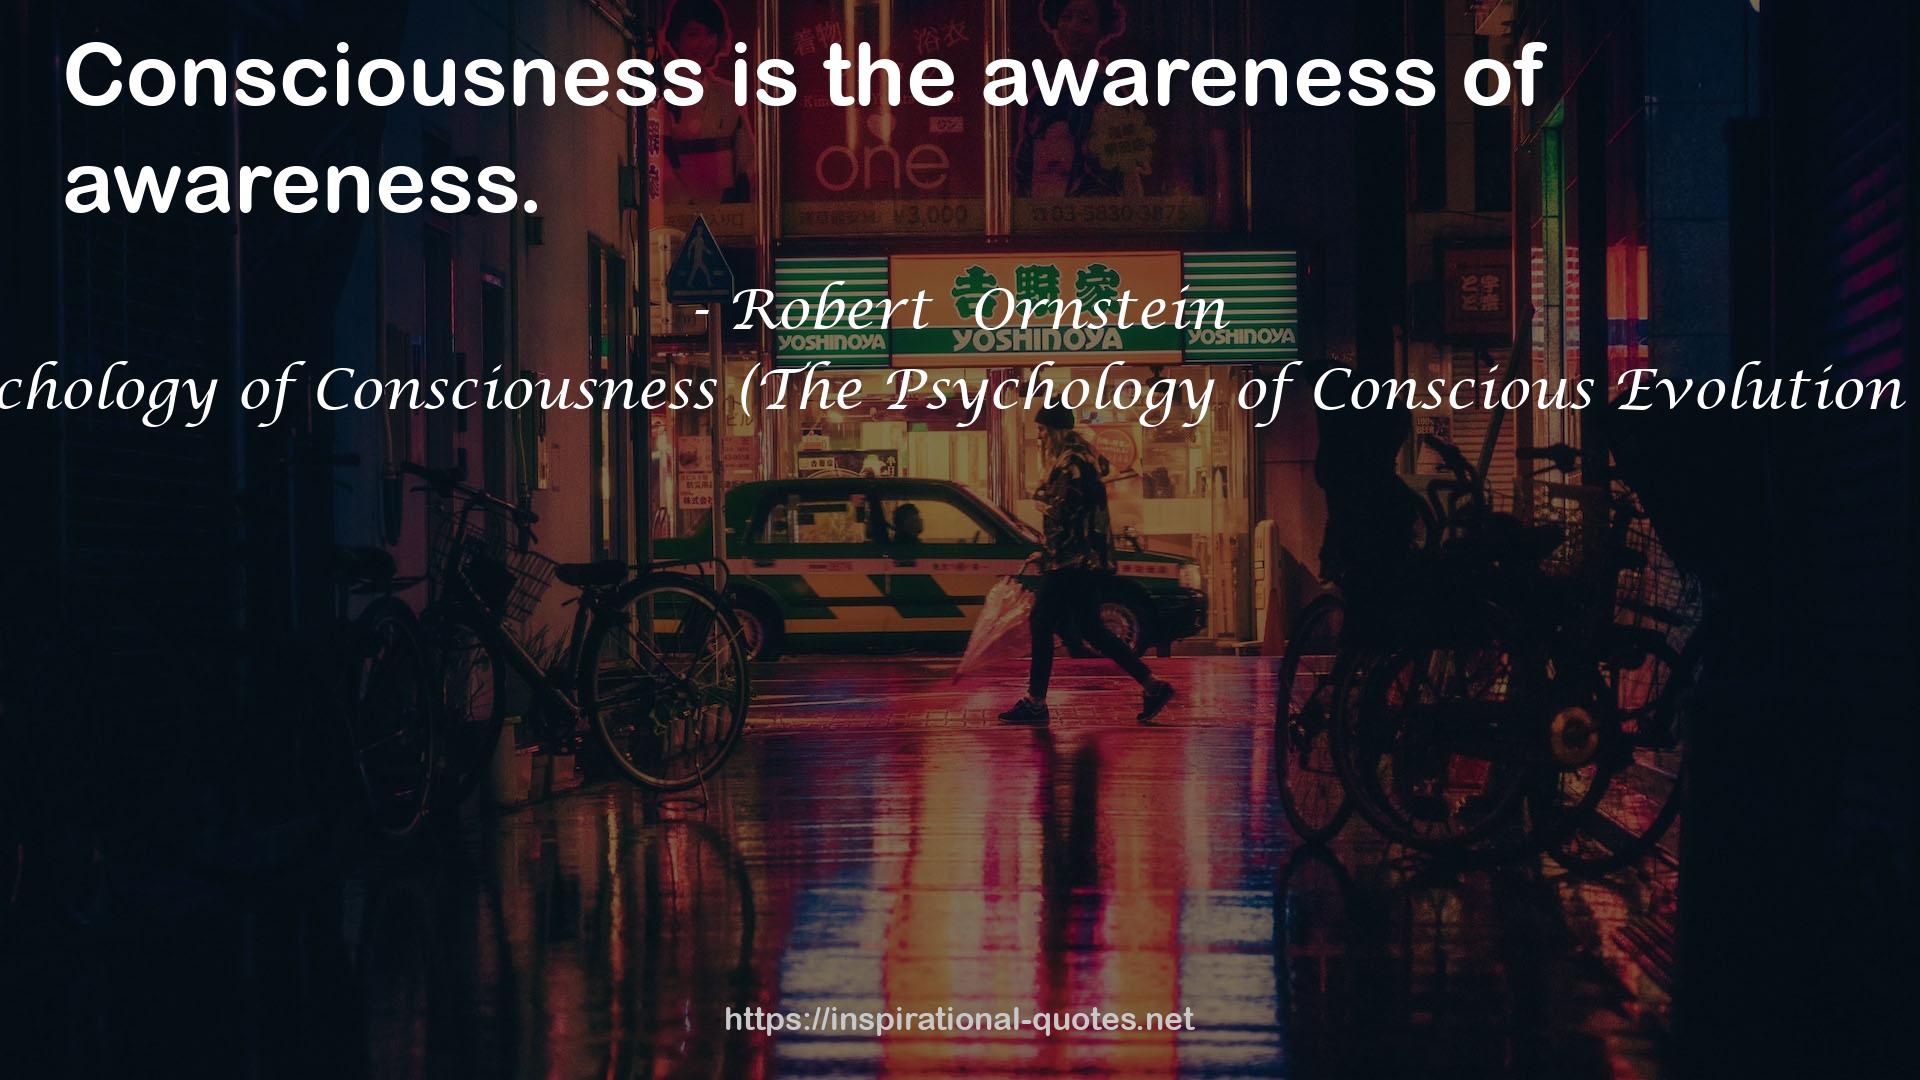 The Psychology of Consciousness (The Psychology of Conscious Evolution Trilogy) QUOTES